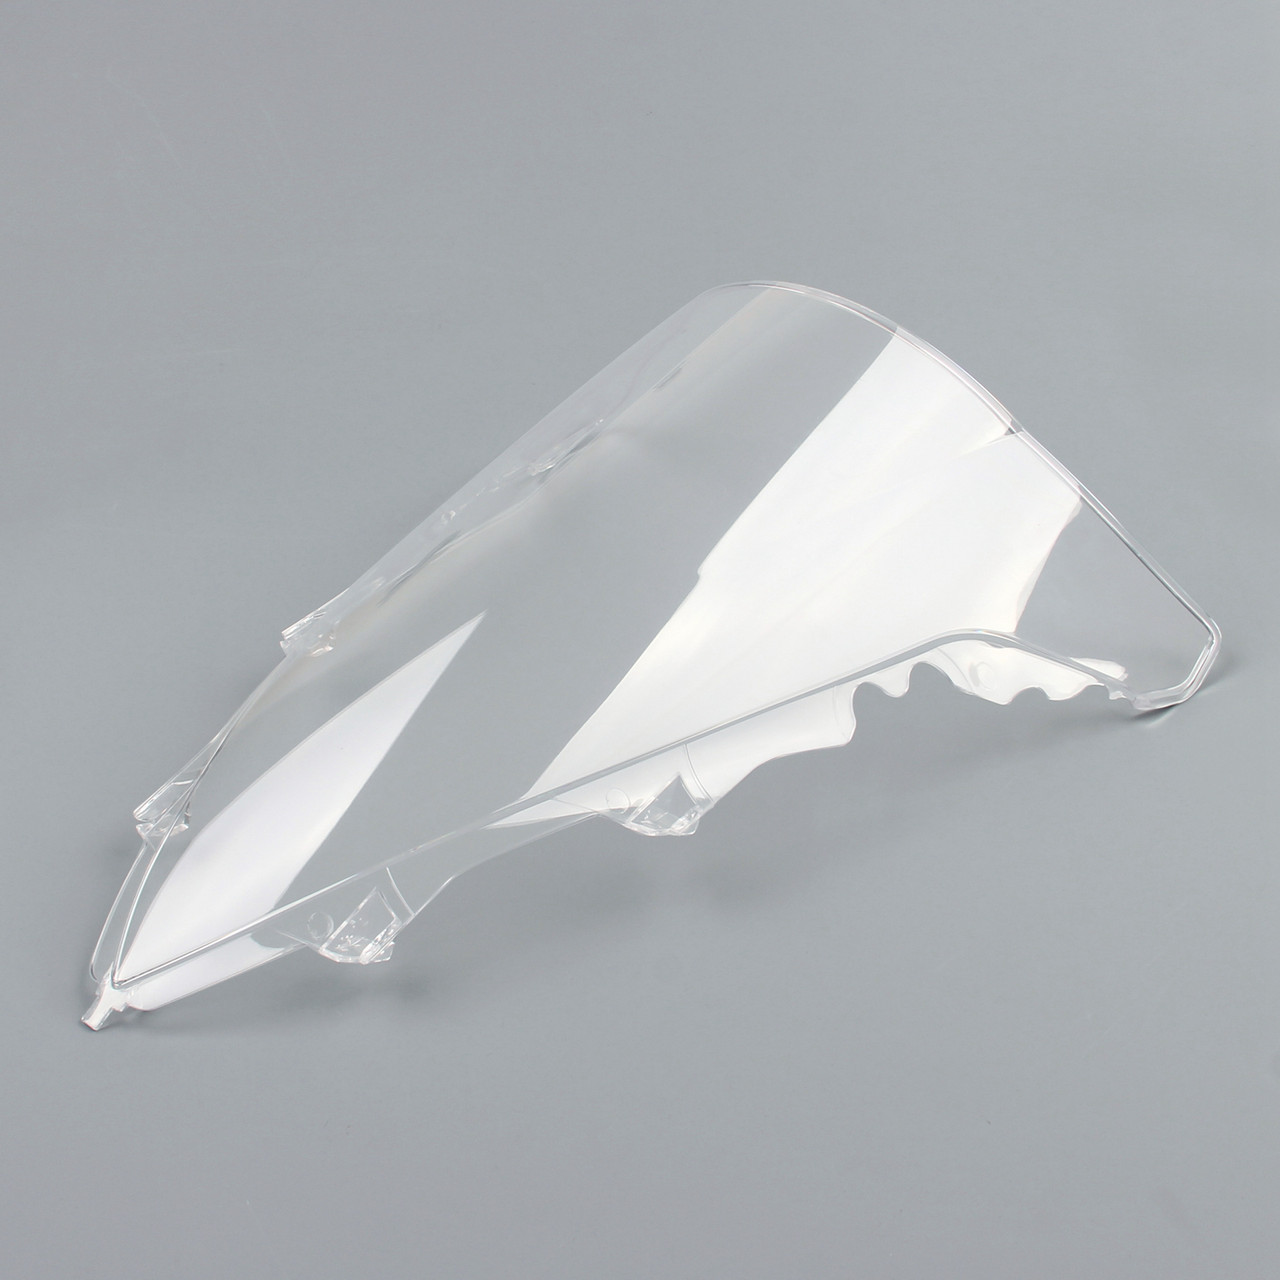 Windshield Windscreen Double Bubble Fit for Yamaha YZF R1 2009-2014 Clear